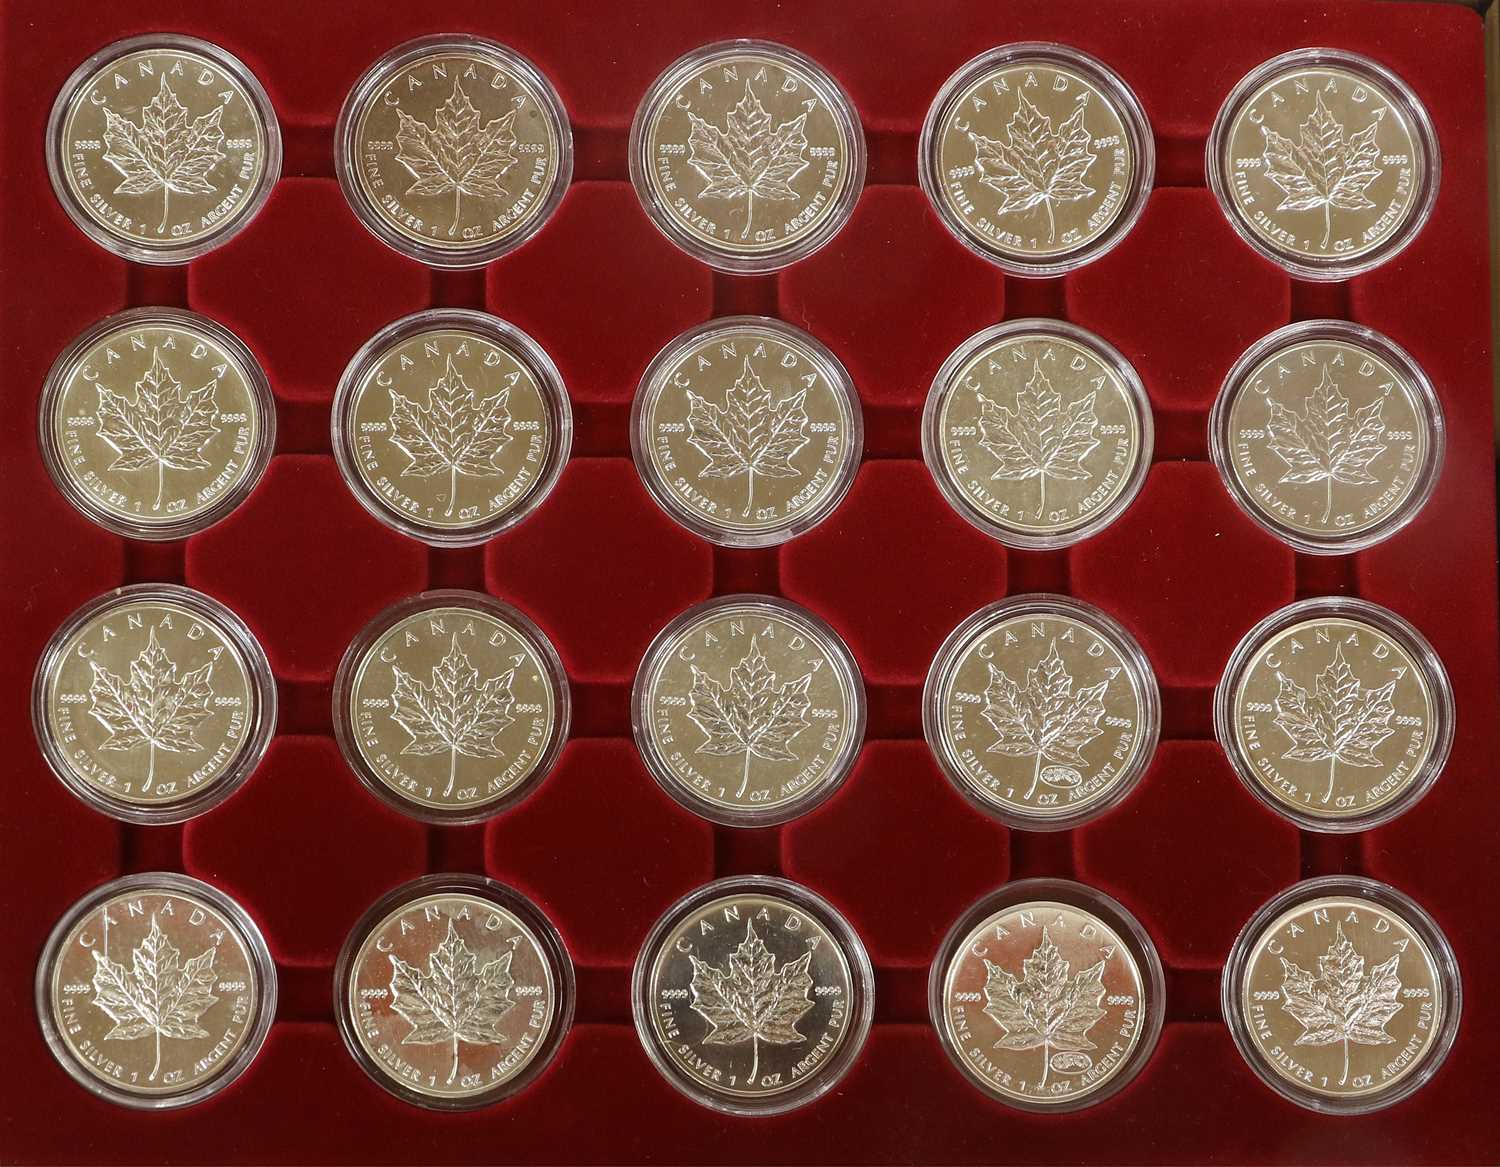 20x Canada 1oz Fine Silver Maple Leaf Coins, full date run 1988-2006, 5 dollar face value, all coins - Image 2 of 2